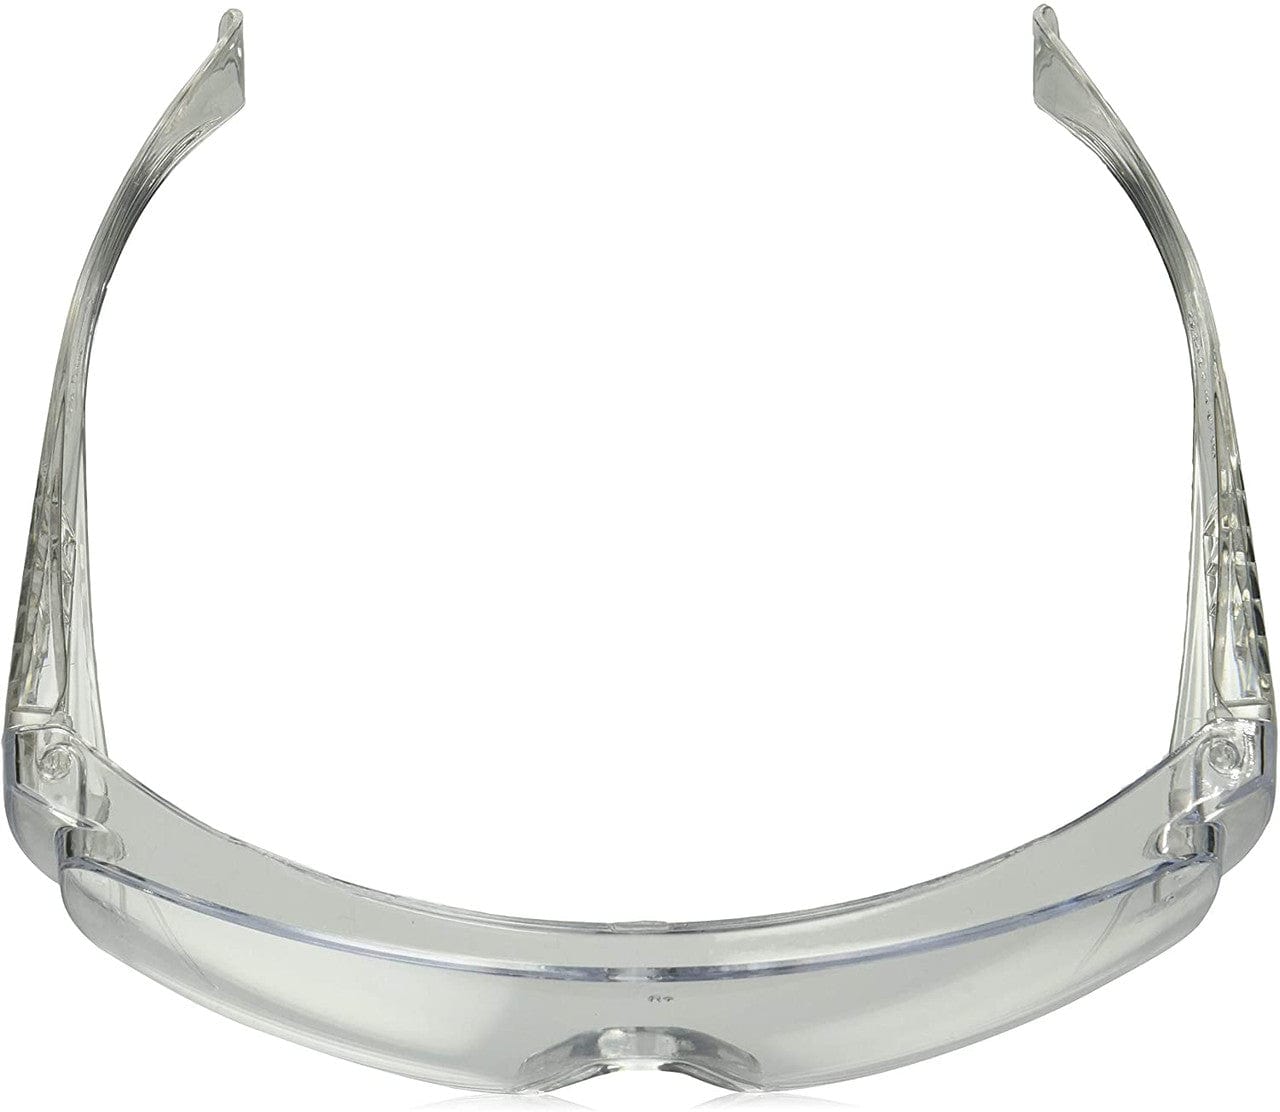 Radians Chief OTG Safety Glasses 360-C Top View